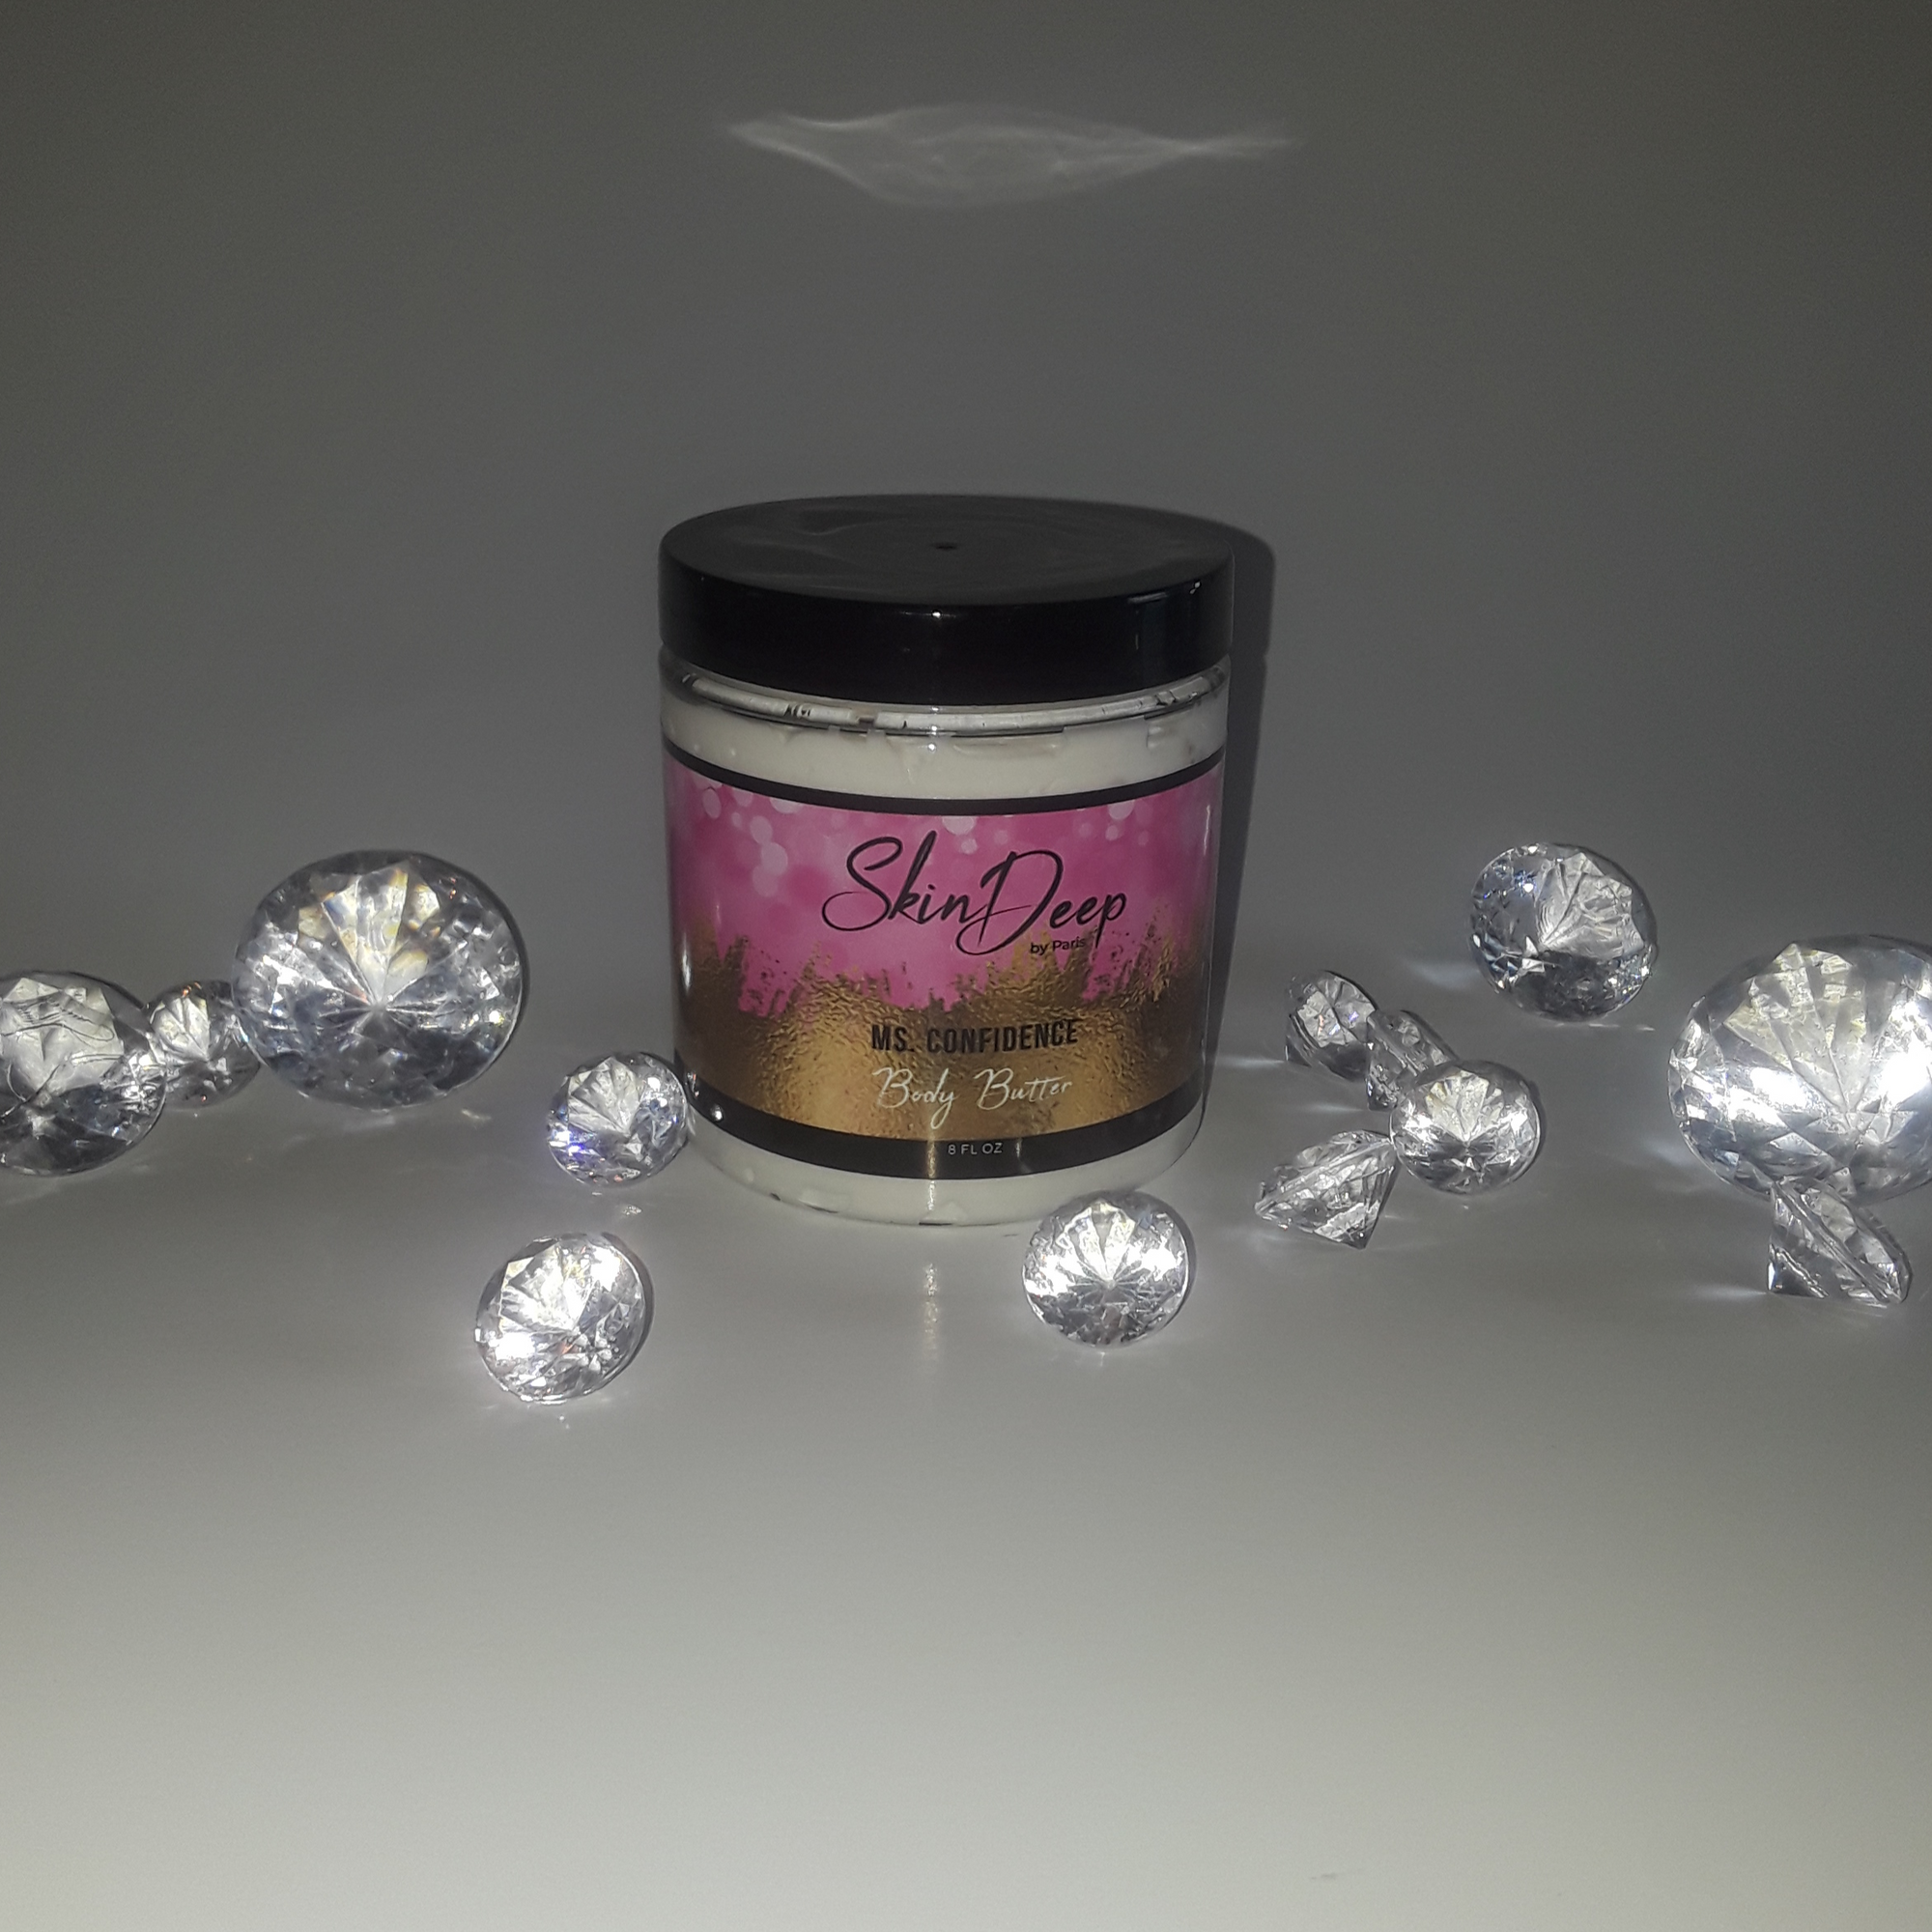 Ms. Confidence Body Butter